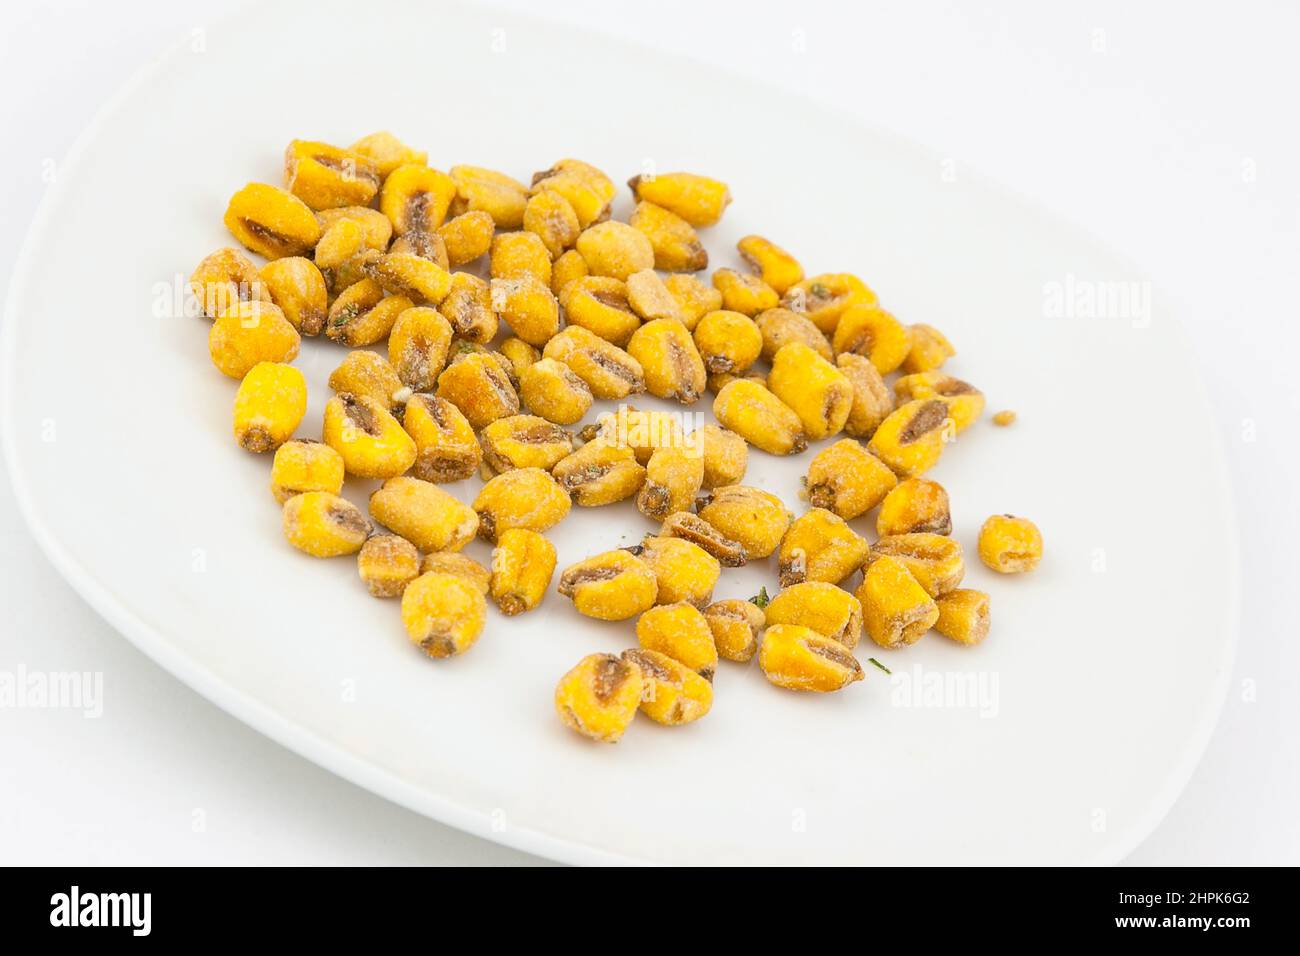 Food, Snacks, Cheese and onion flavoured crunchy corn. Stock Photo